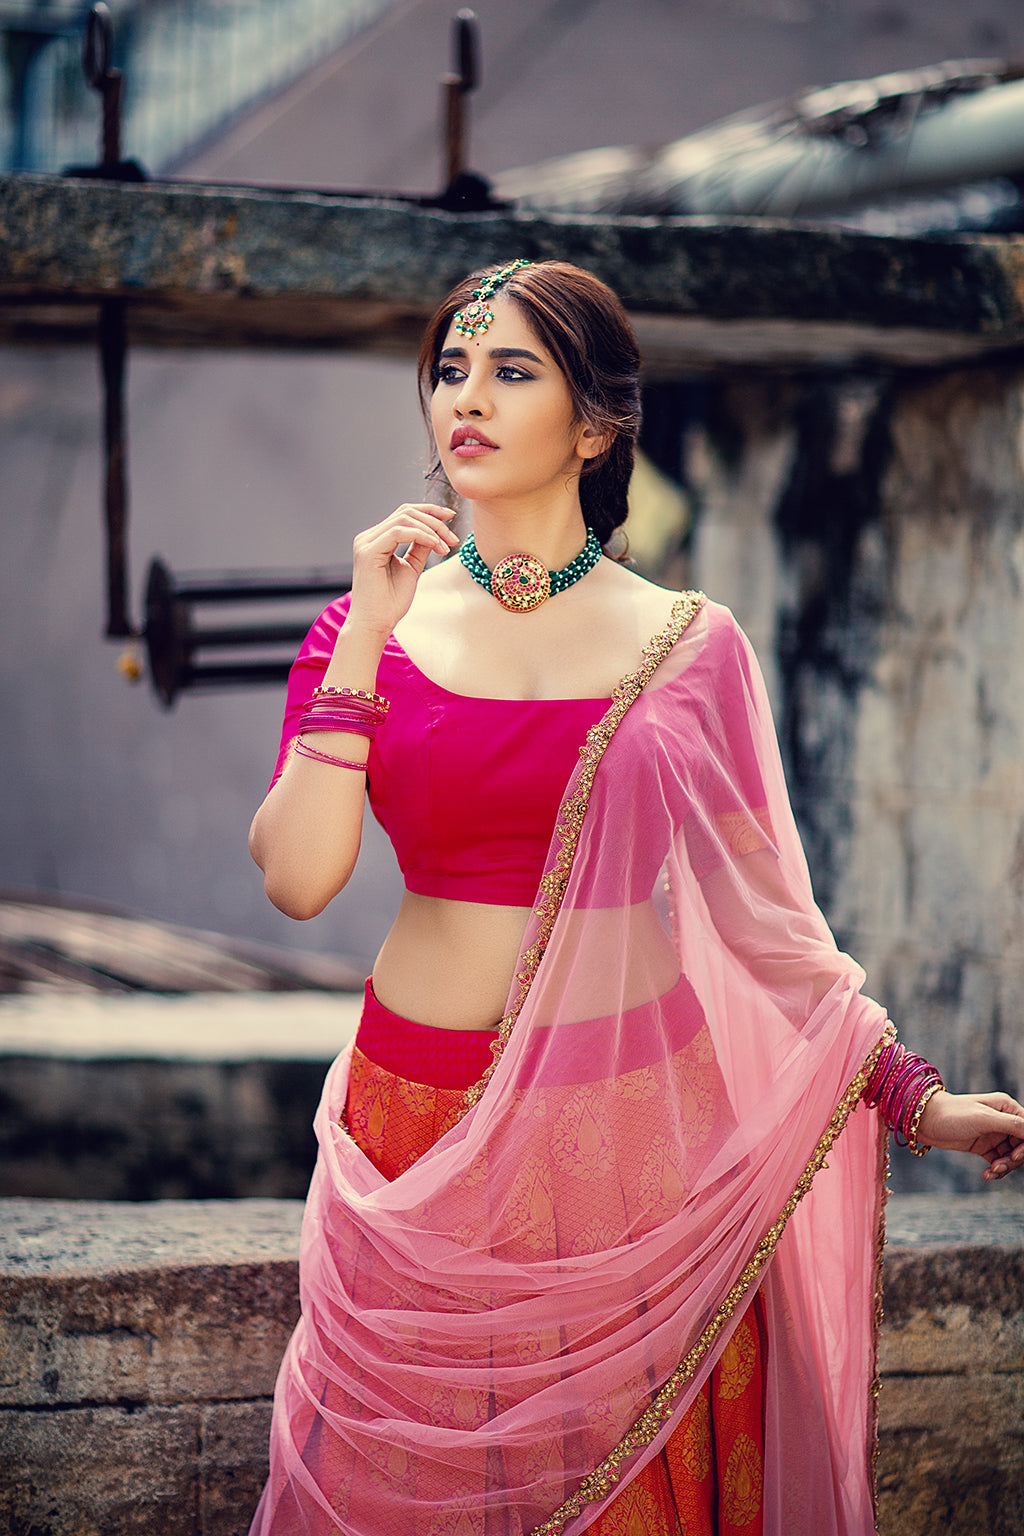 Pink blouse with zari border sleeve, orange pleated kanchi skirt and pink tulle embroidered dupatta